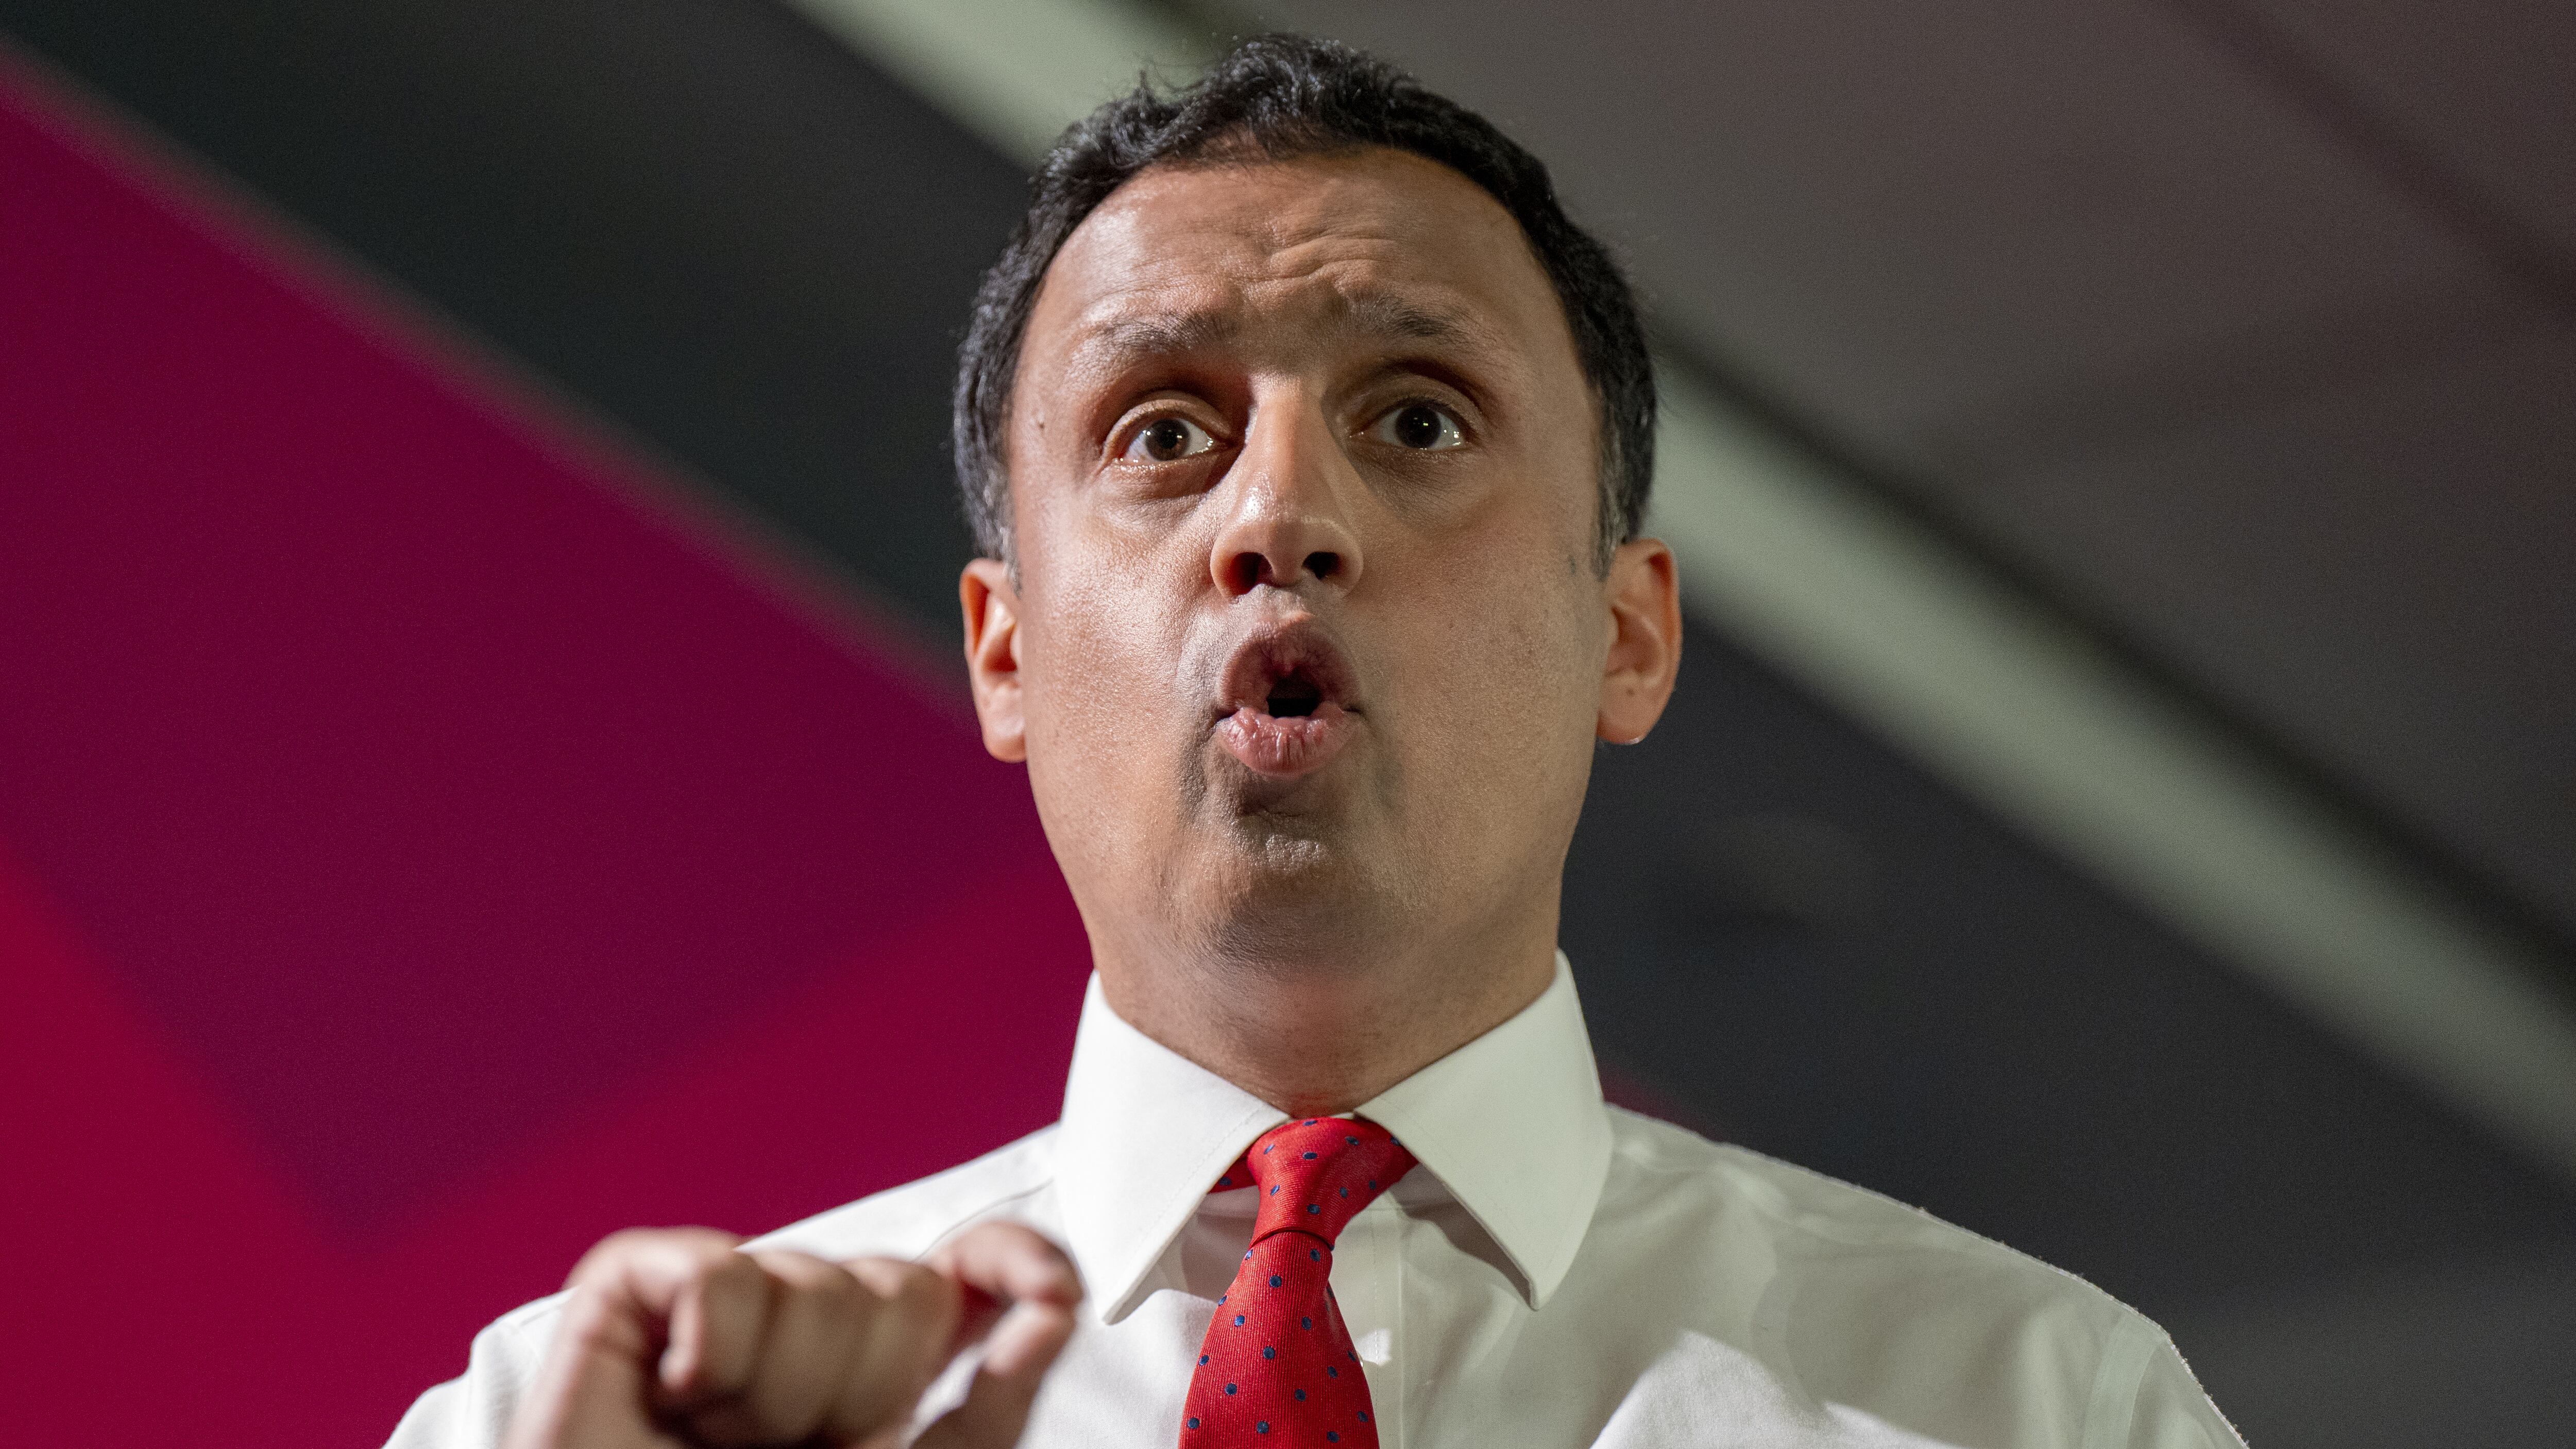 Anas Sarwar said ‘economic chaos’ brought about by the Tories left families making ‘impossible choices’